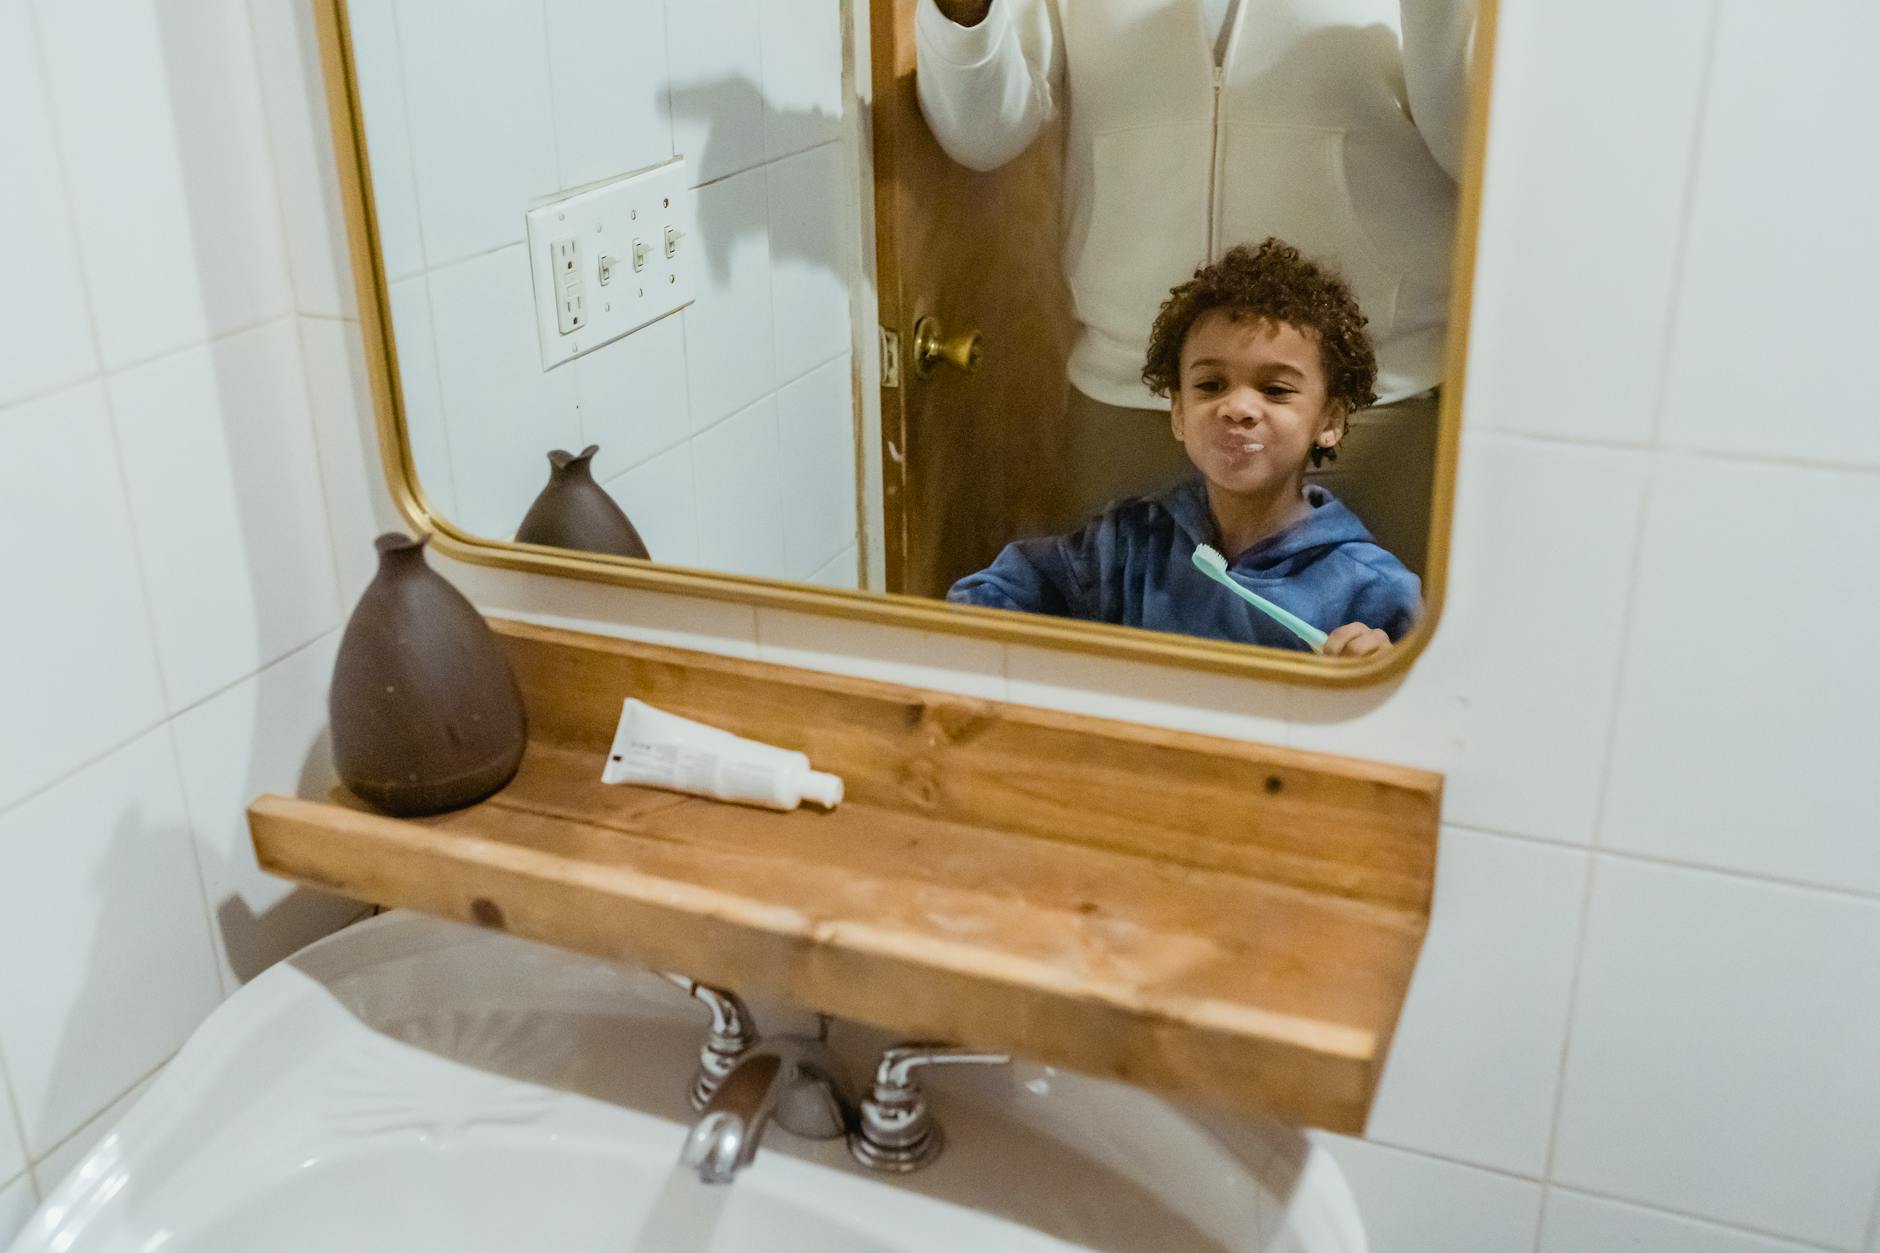 Black boy brushing teeth with unrecognizable father